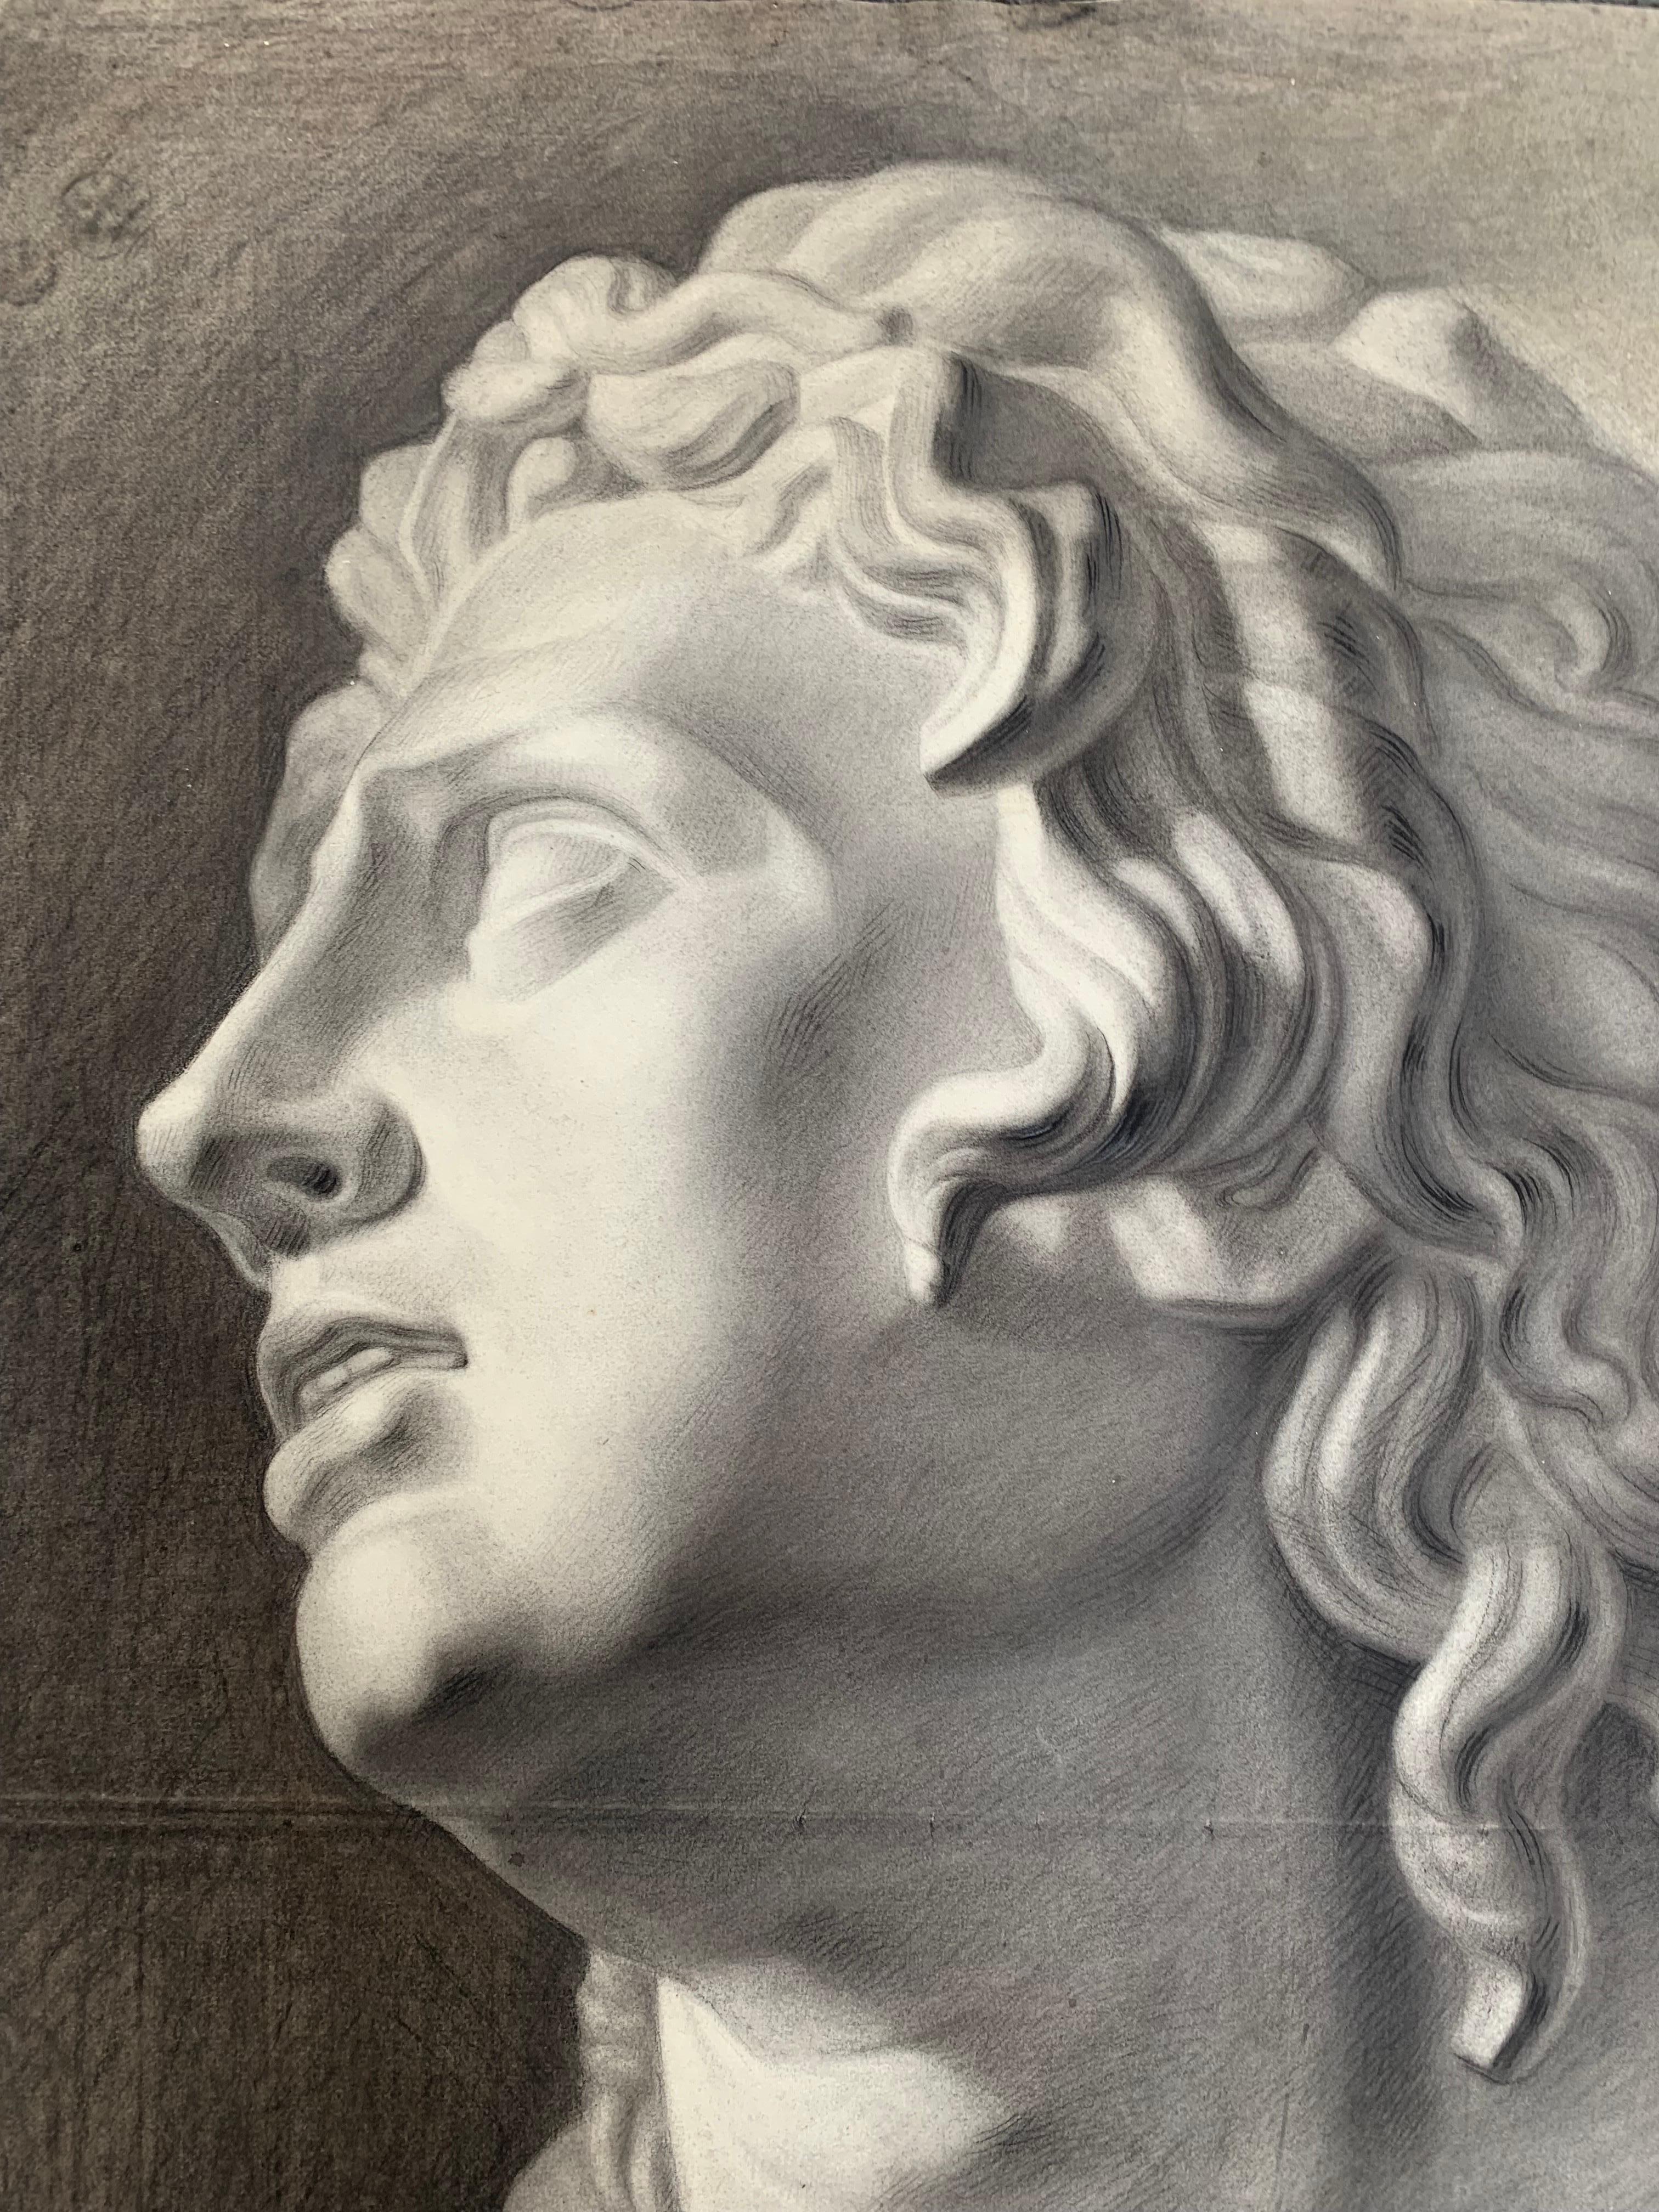 Large XIXth cent. Academic drawing of Alexander The Great’s bust from Uffizi.  7